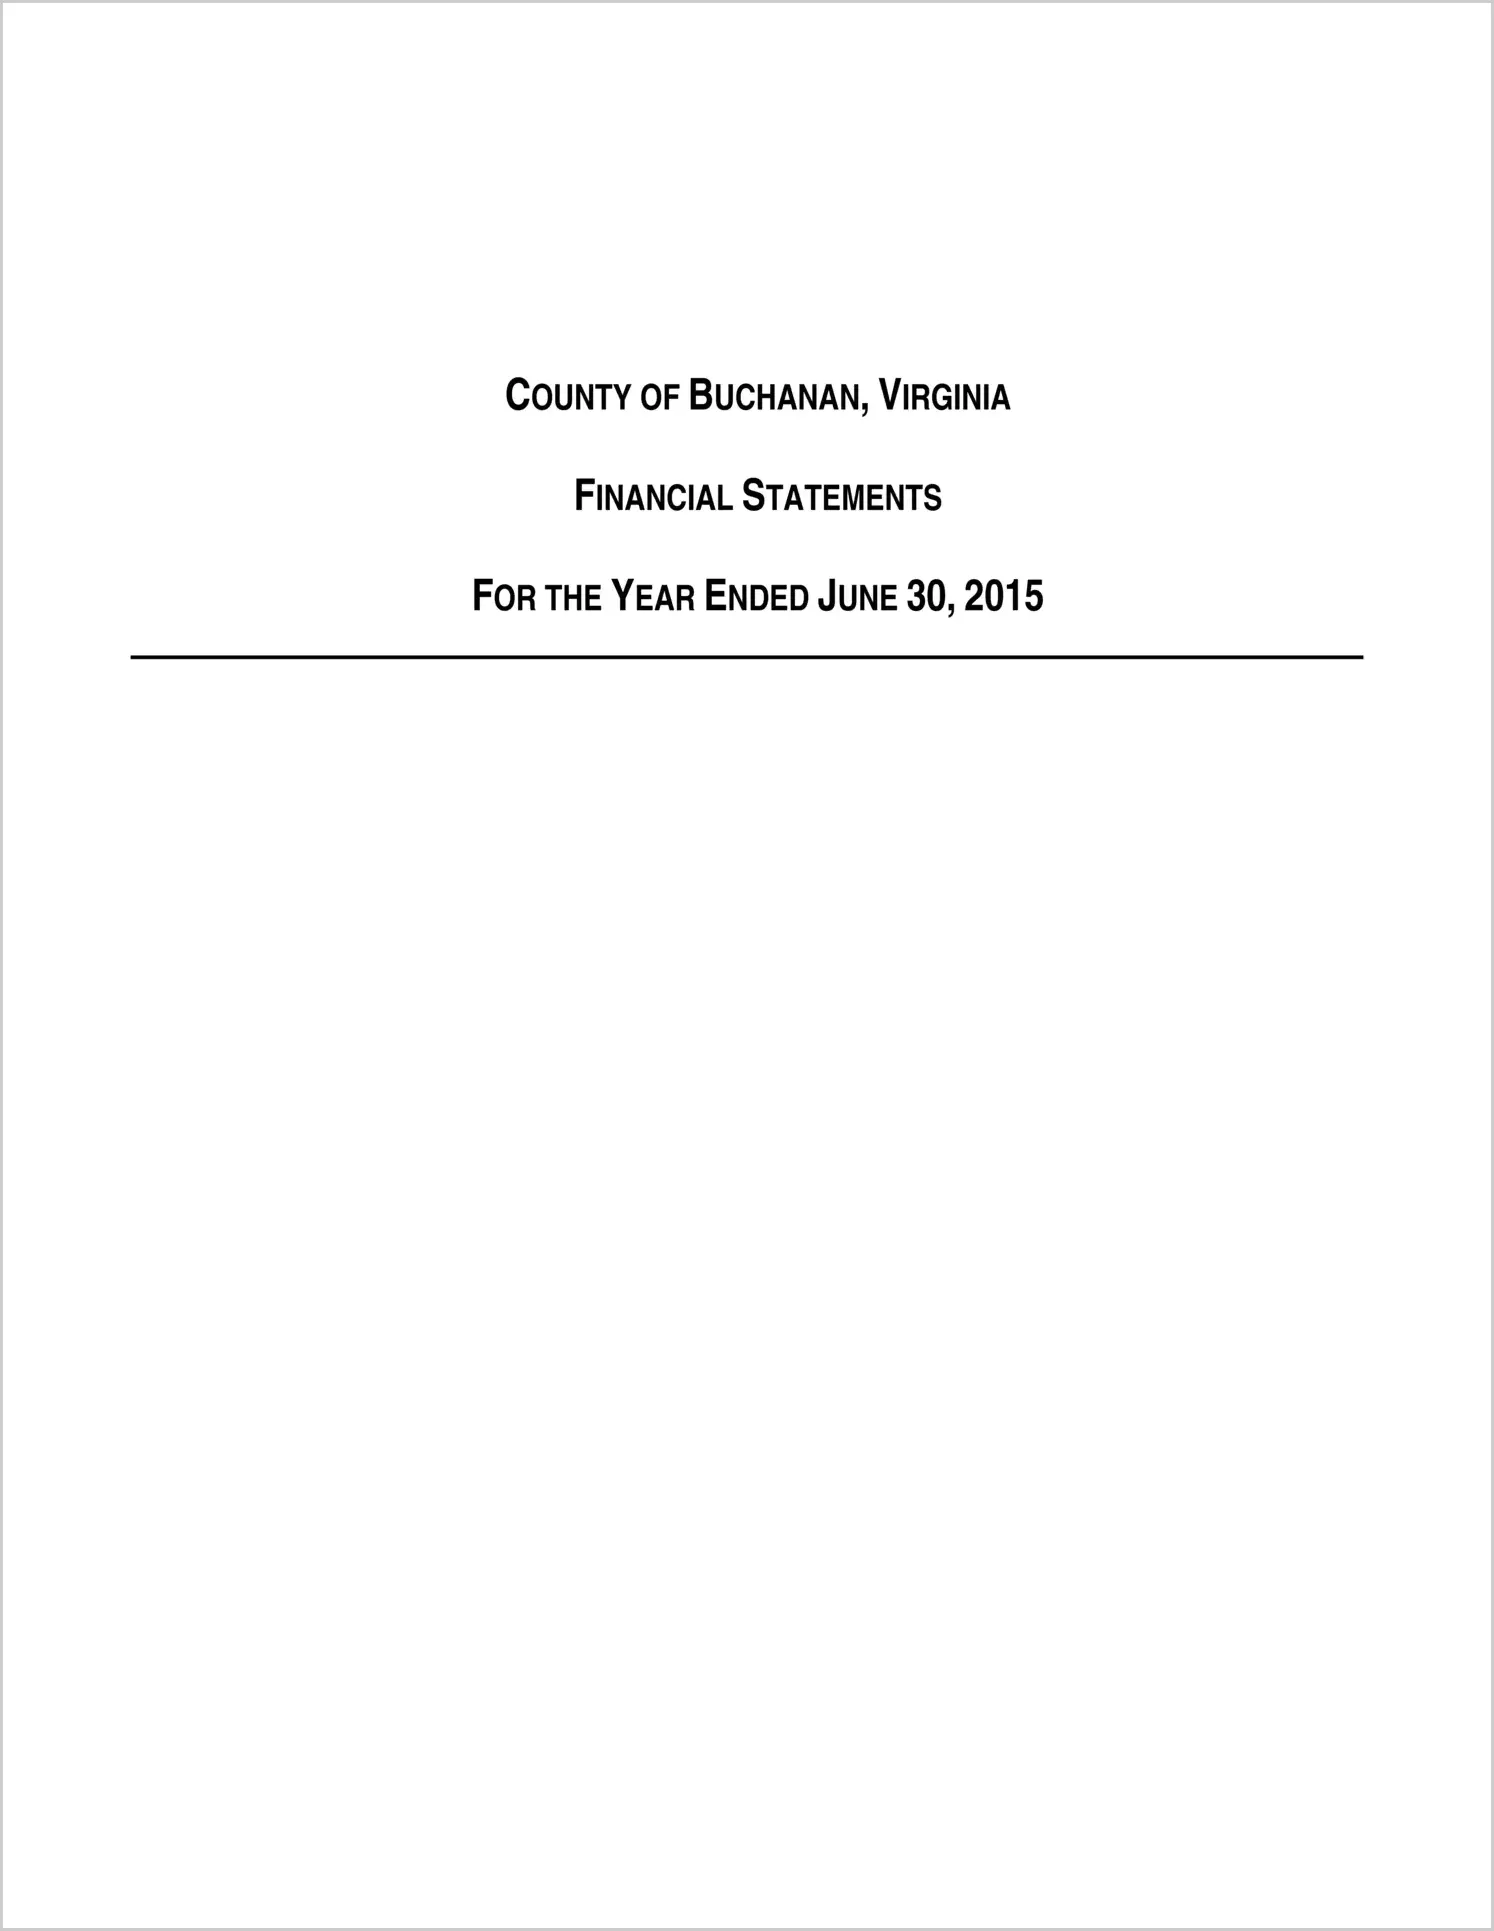 2015 Annual Financial Report for County of Buchanan